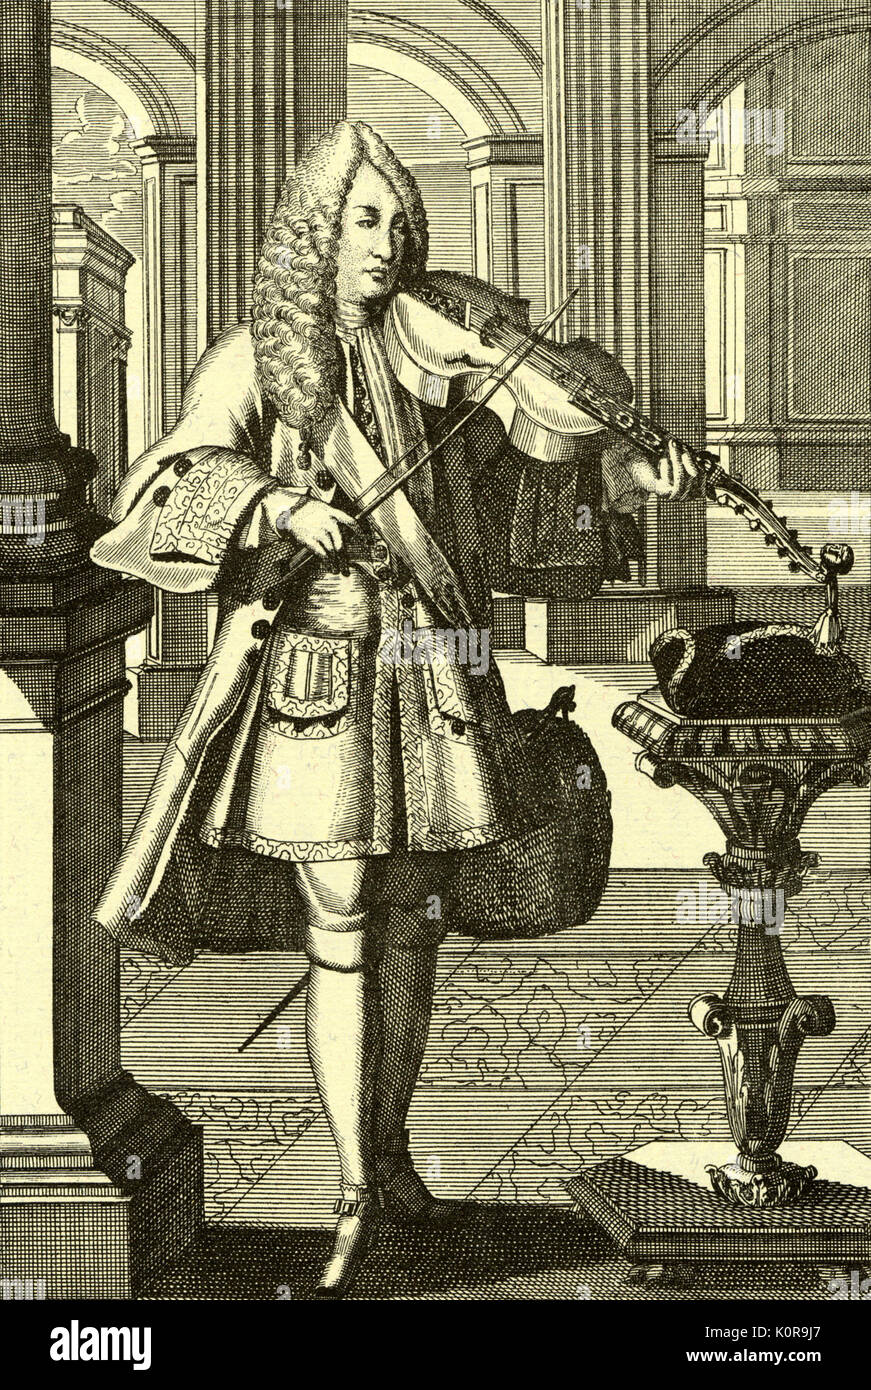 Man playing viola d'amore (viol d'amour). Engraving by J C Weigel (1661-1726) from 'Musikalisches Theatrum'. Stock Photo